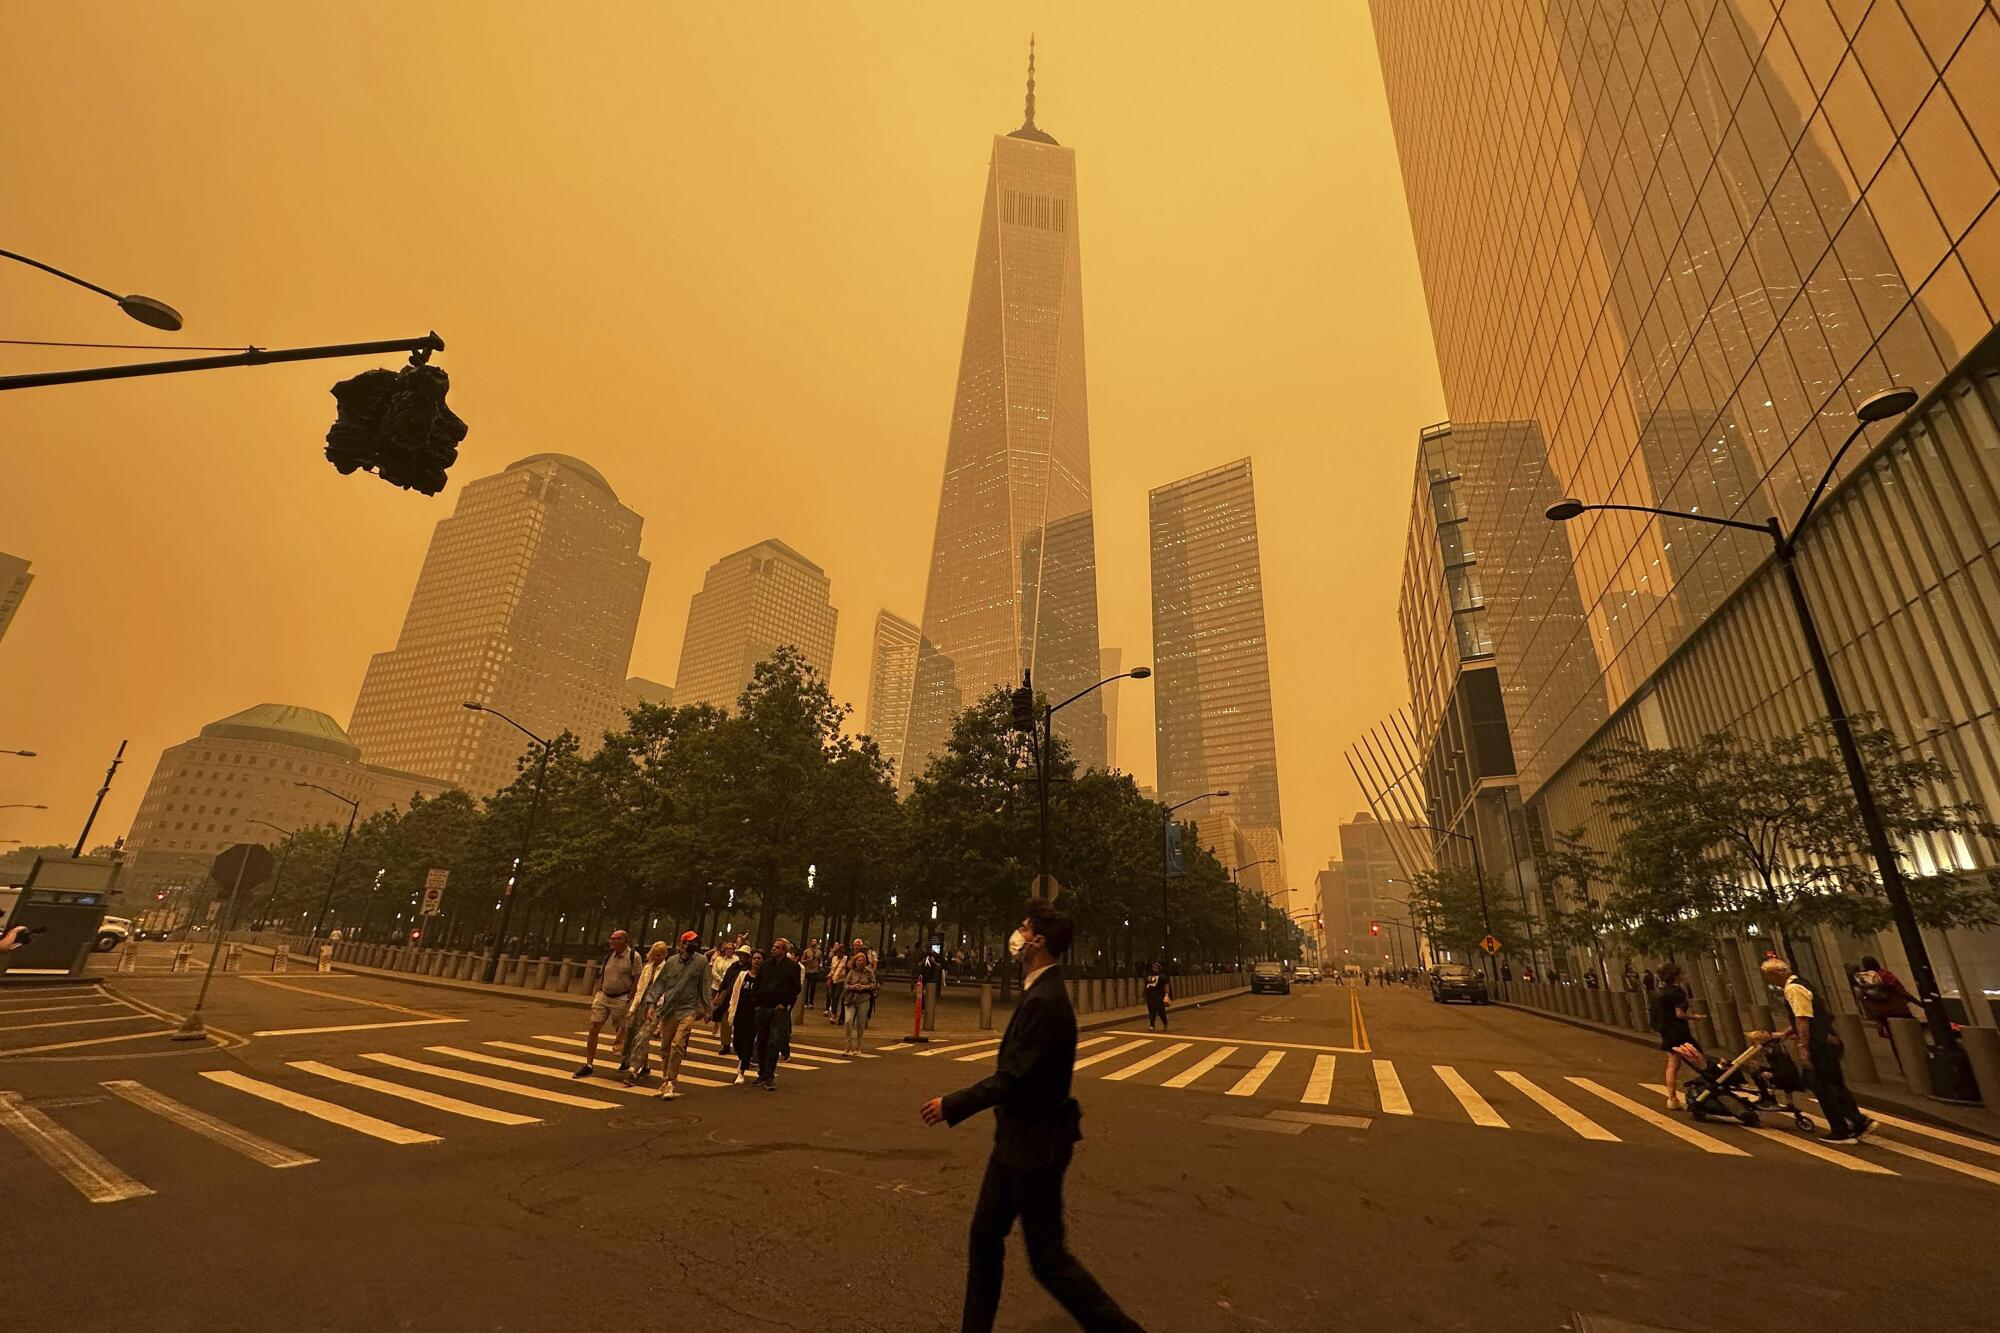 Pedestrians walk along streets while smoke fills the sky around several skyscrapers